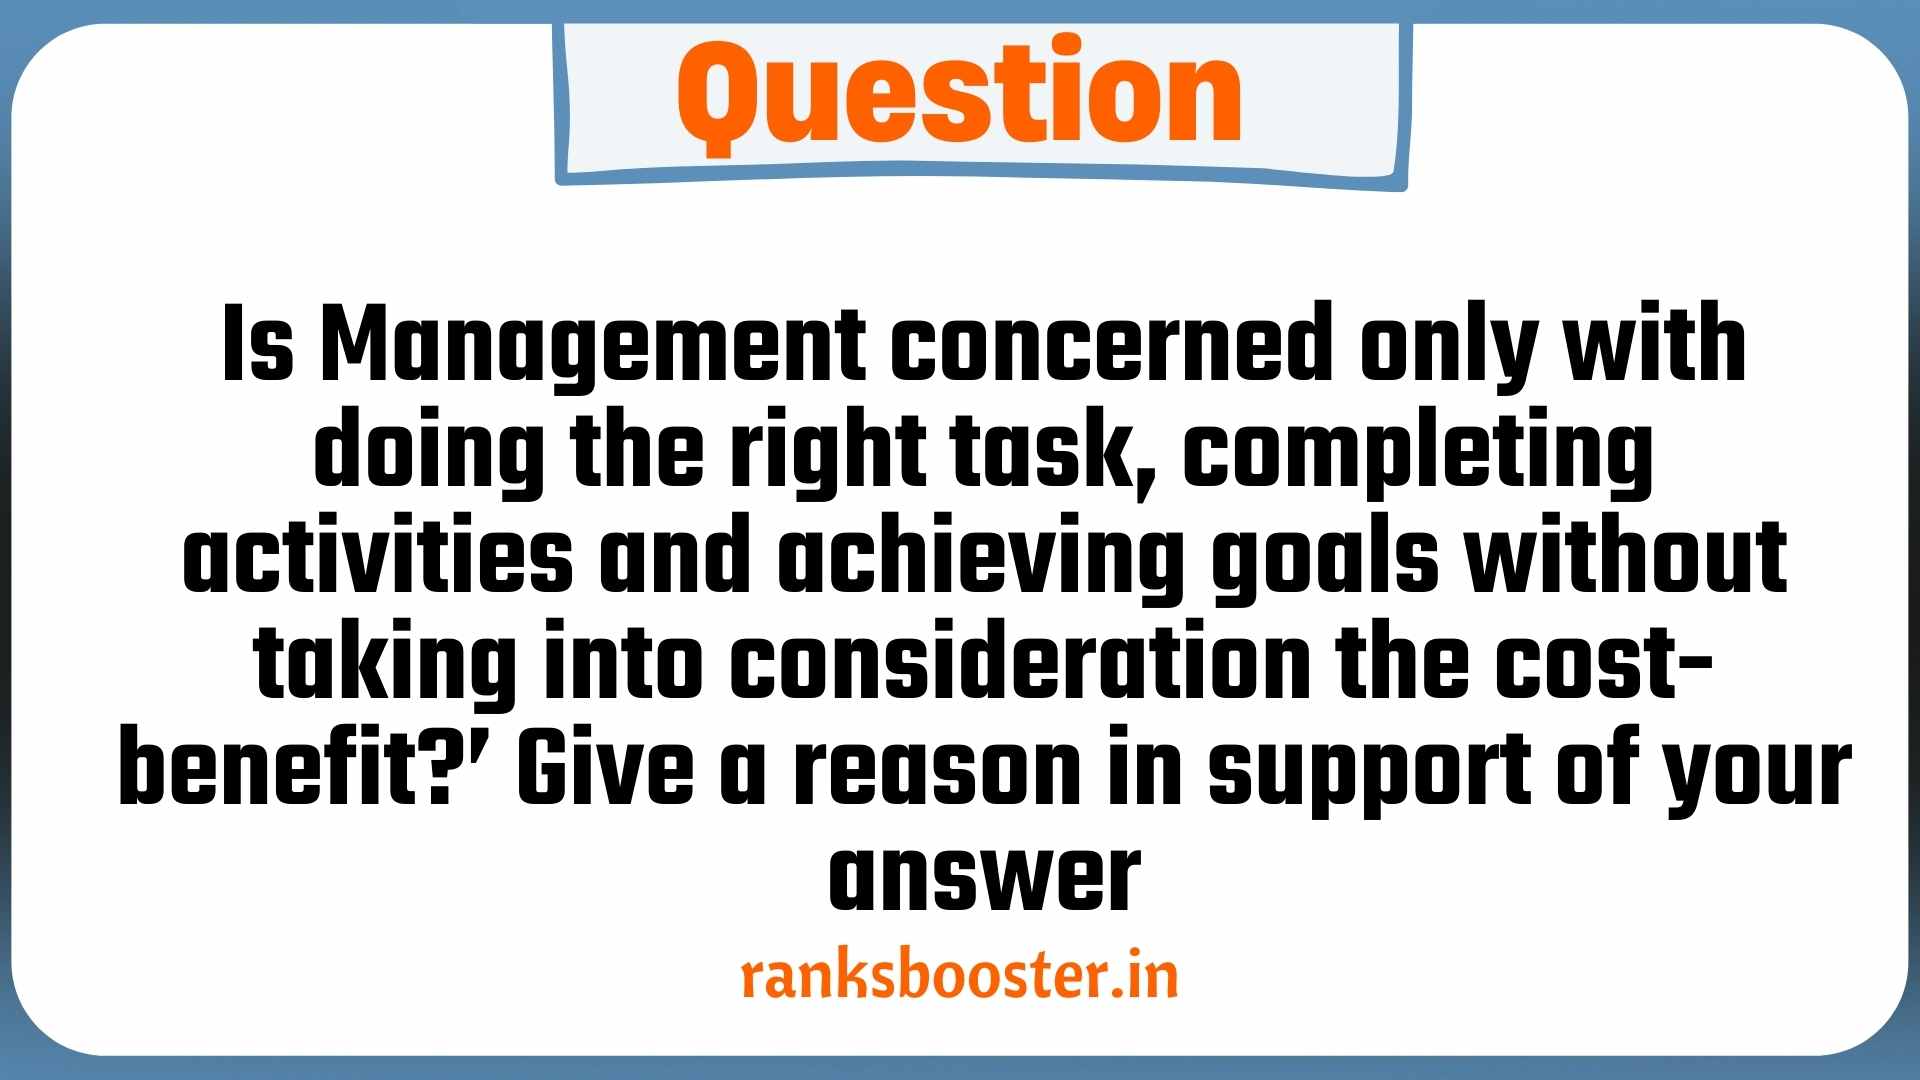 Question: Is Management concerned only with doing the right task, completing activities and achieving goals without taking into consideration the cost-benefit?’ Give a reason in support of your answer. [CBSE Sample Paper 2016]